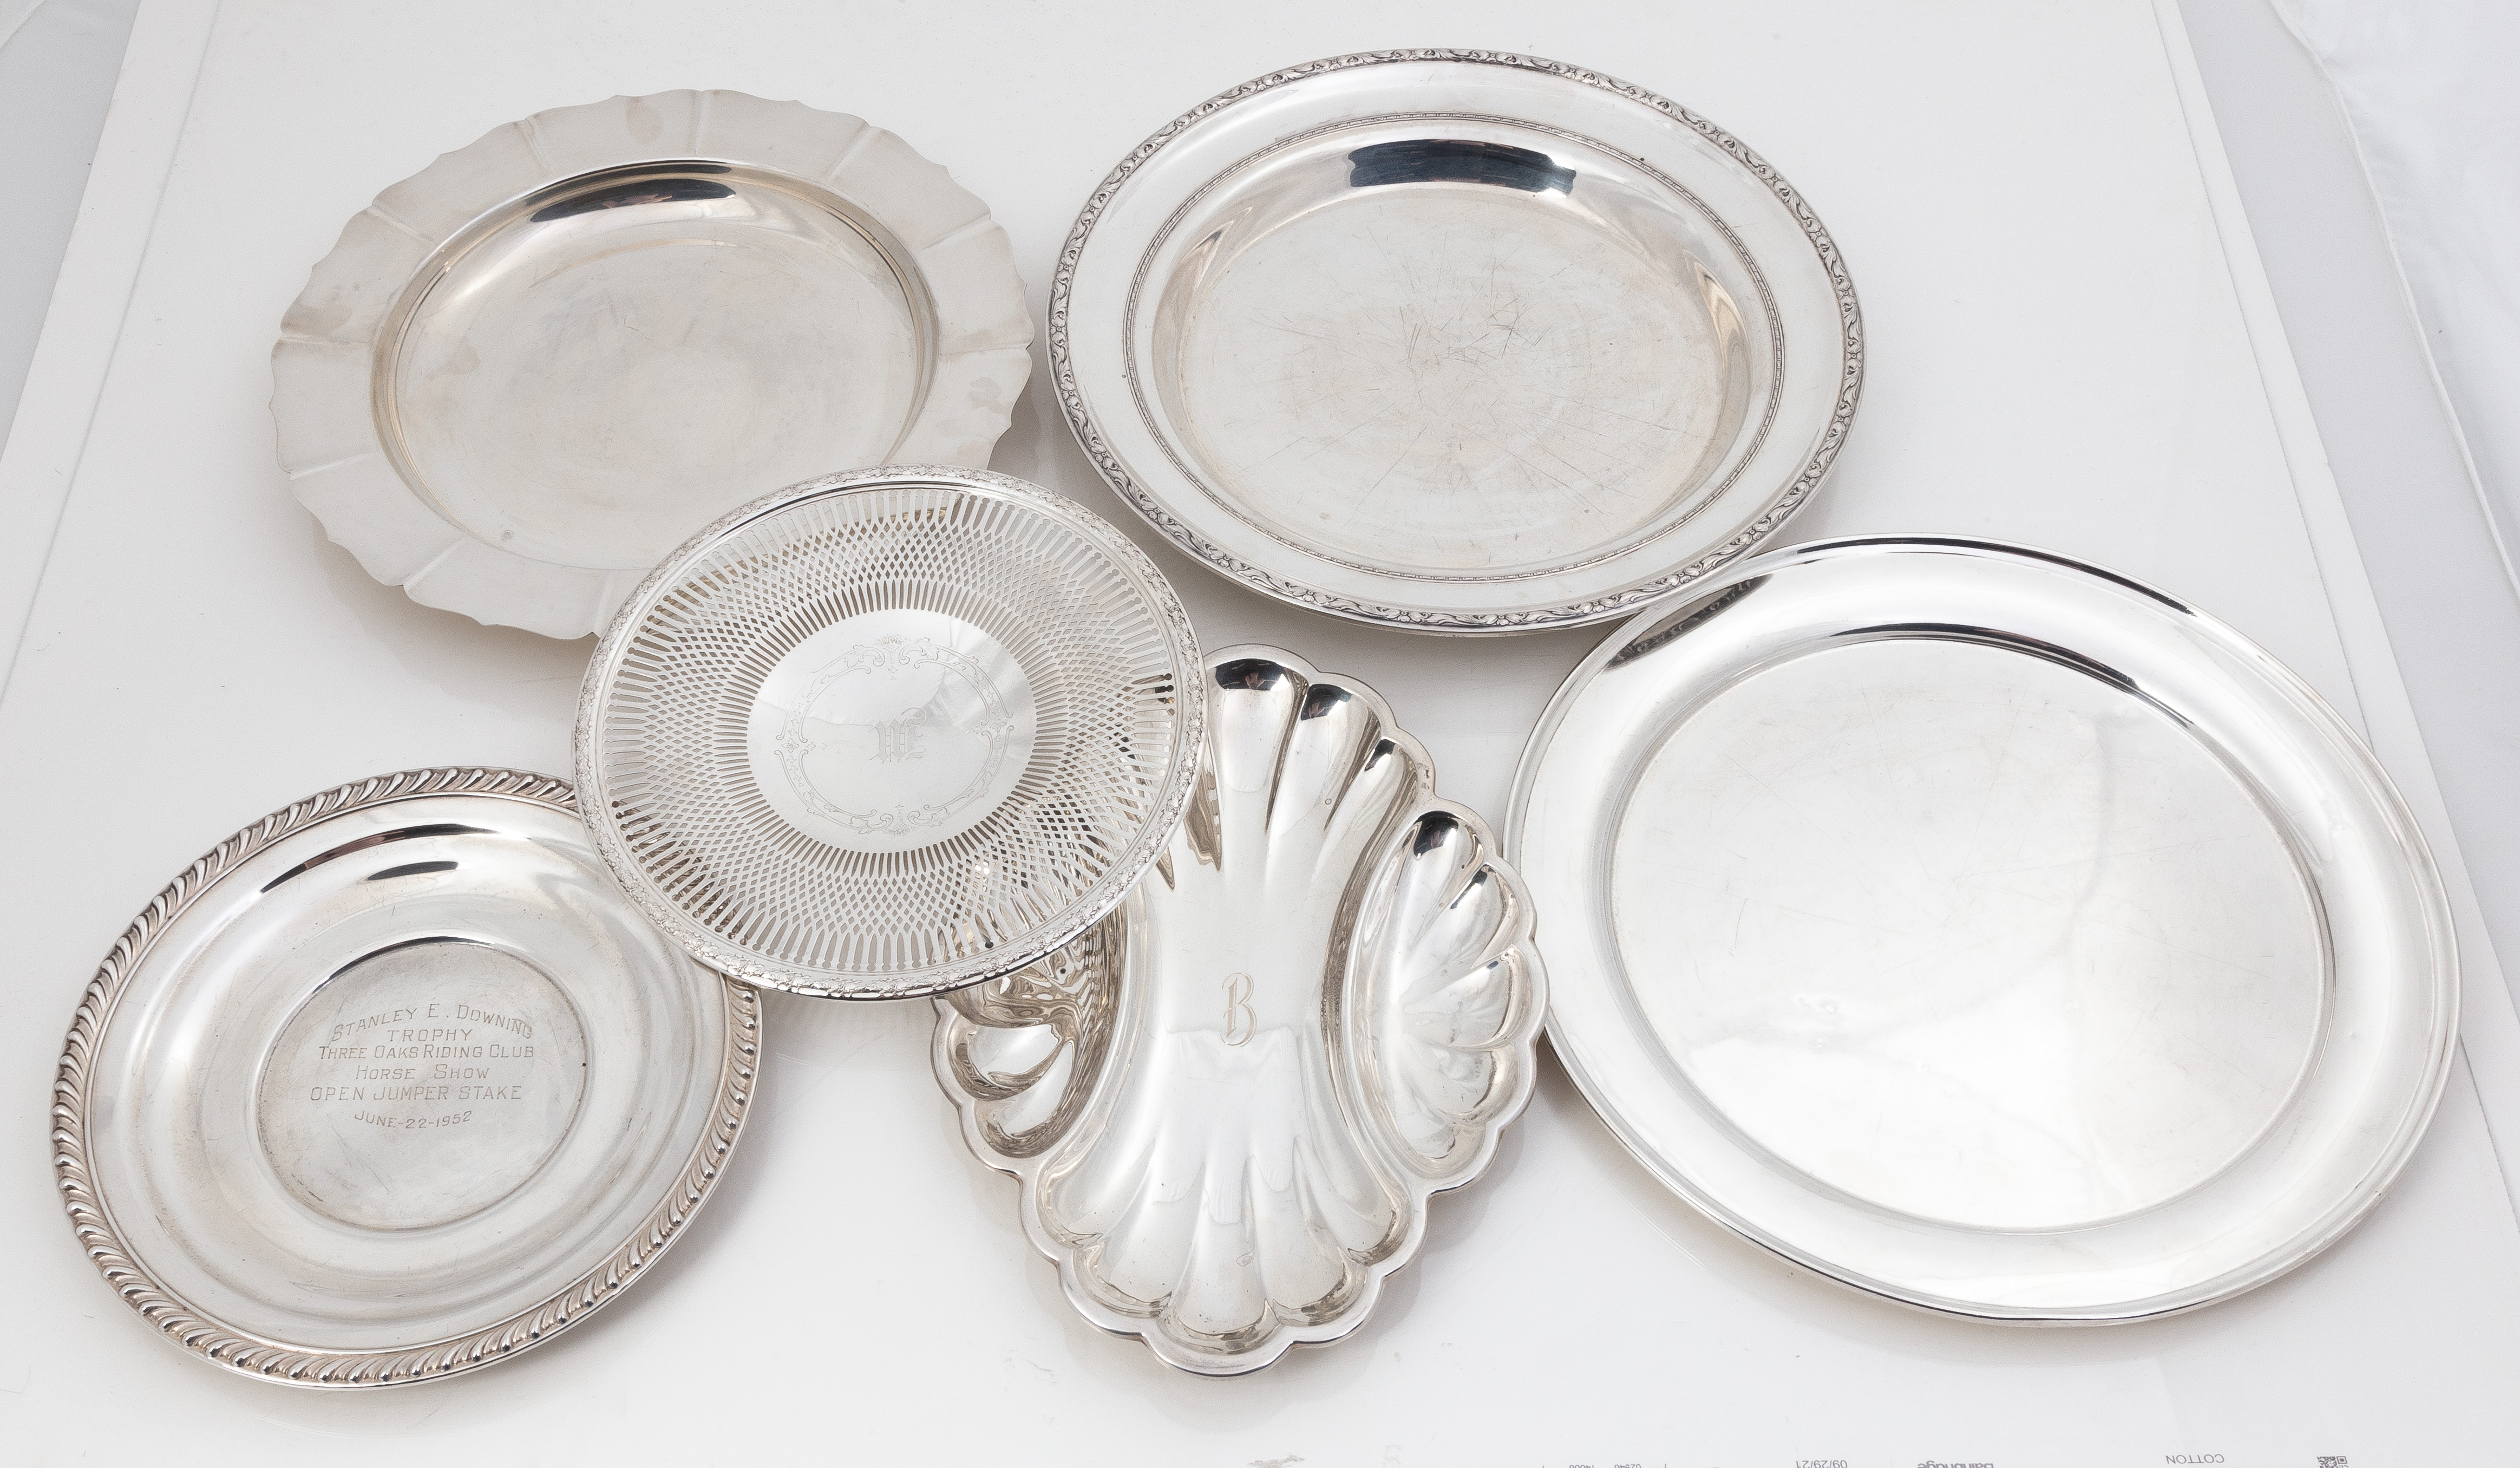 GROUP OF STERLING SILVER TRAYS